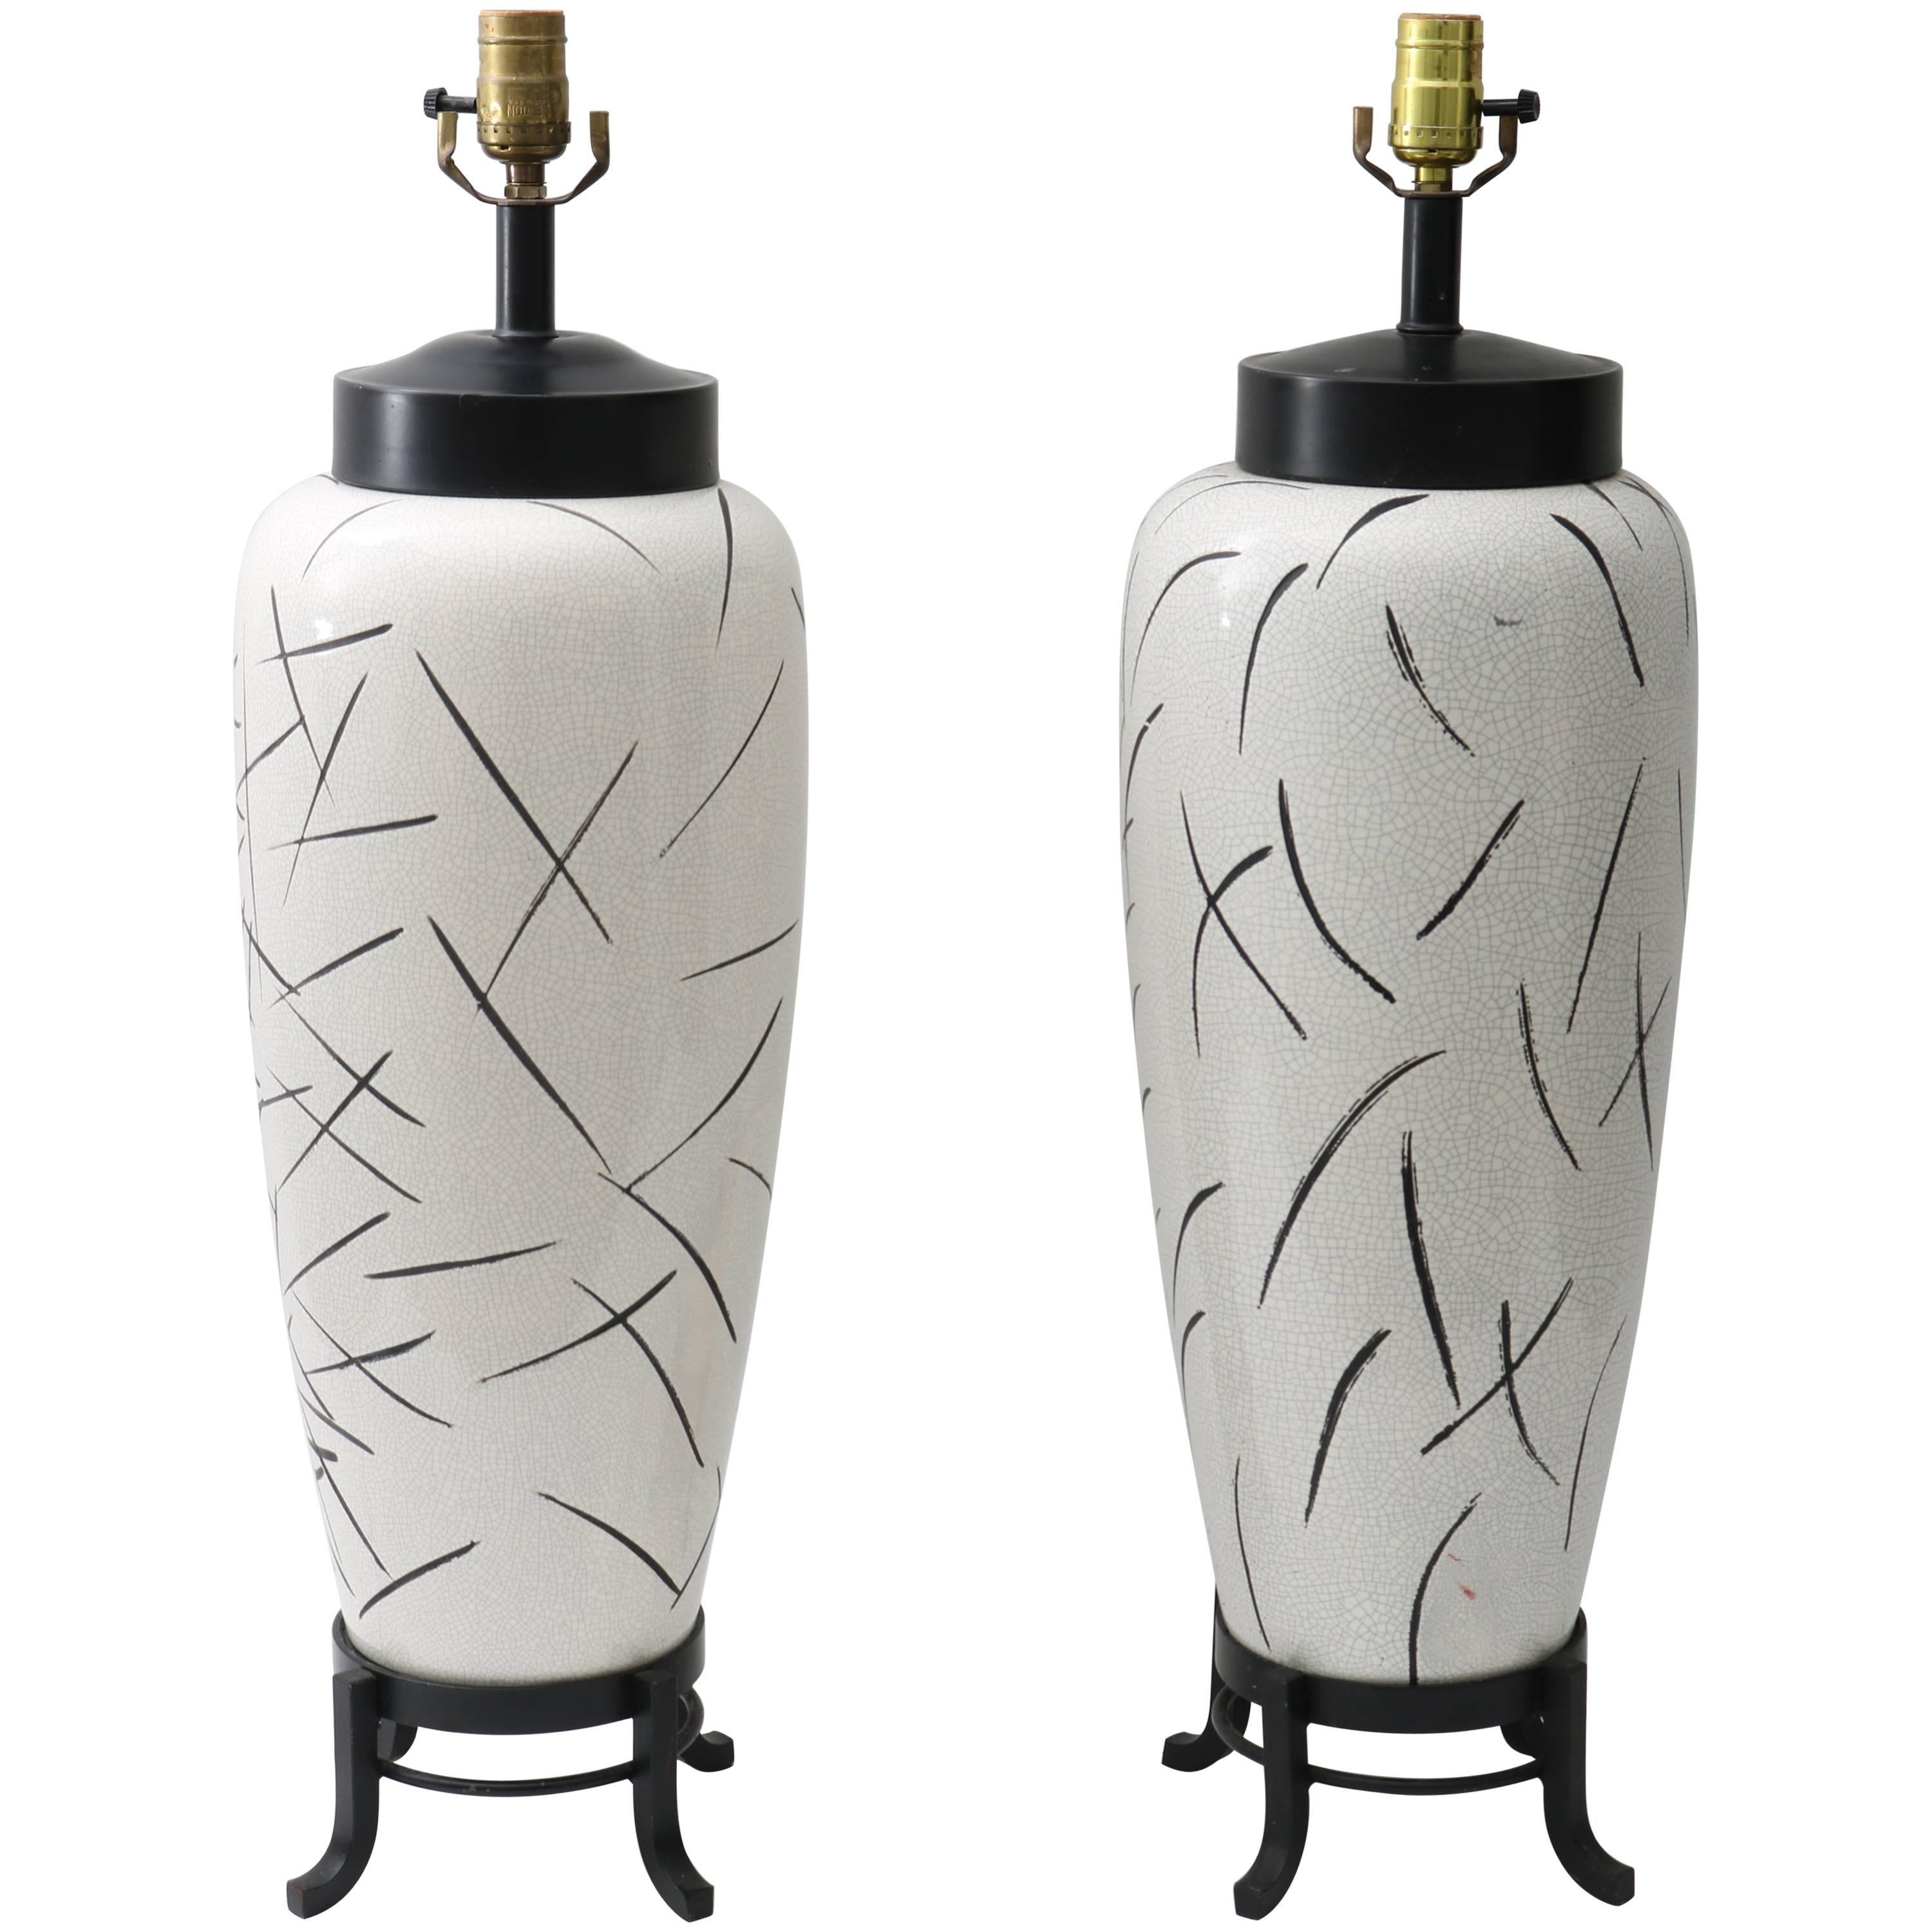 Pair of Table Lamps, Vase Form in Black and White